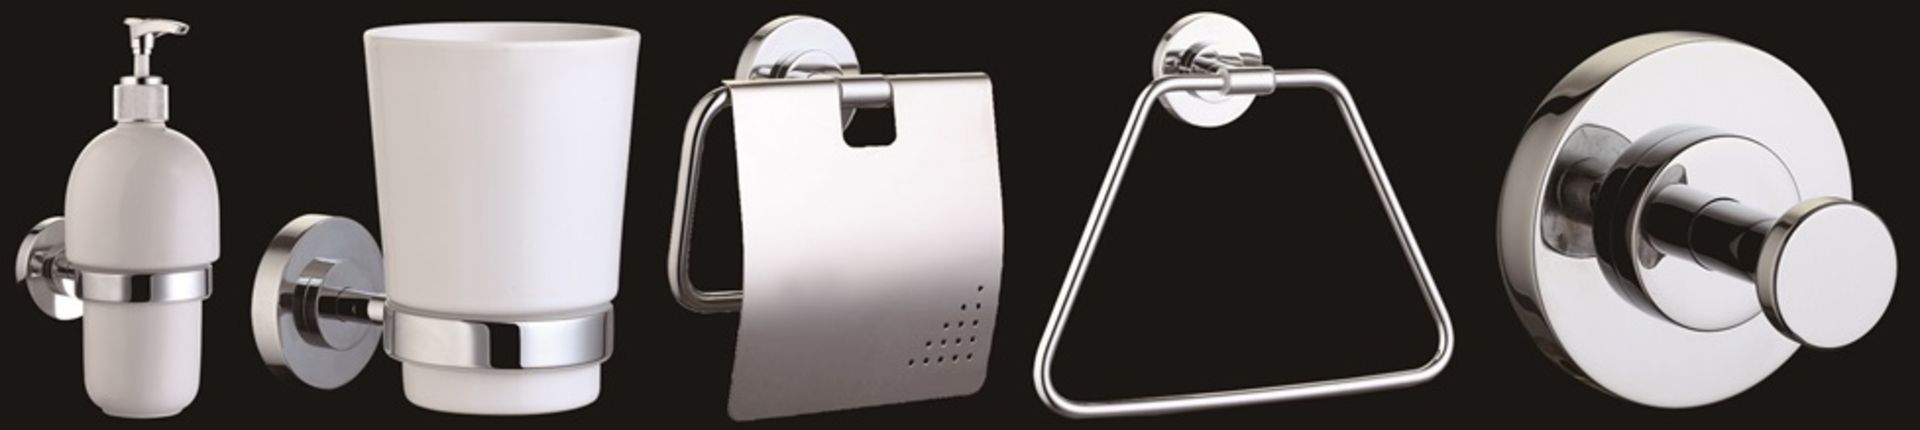 1 x Vogue Series 5 Six Piece Bathroom Accessory Set - Includes WC Roll Holder, Soap Dispenser, - Image 4 of 8